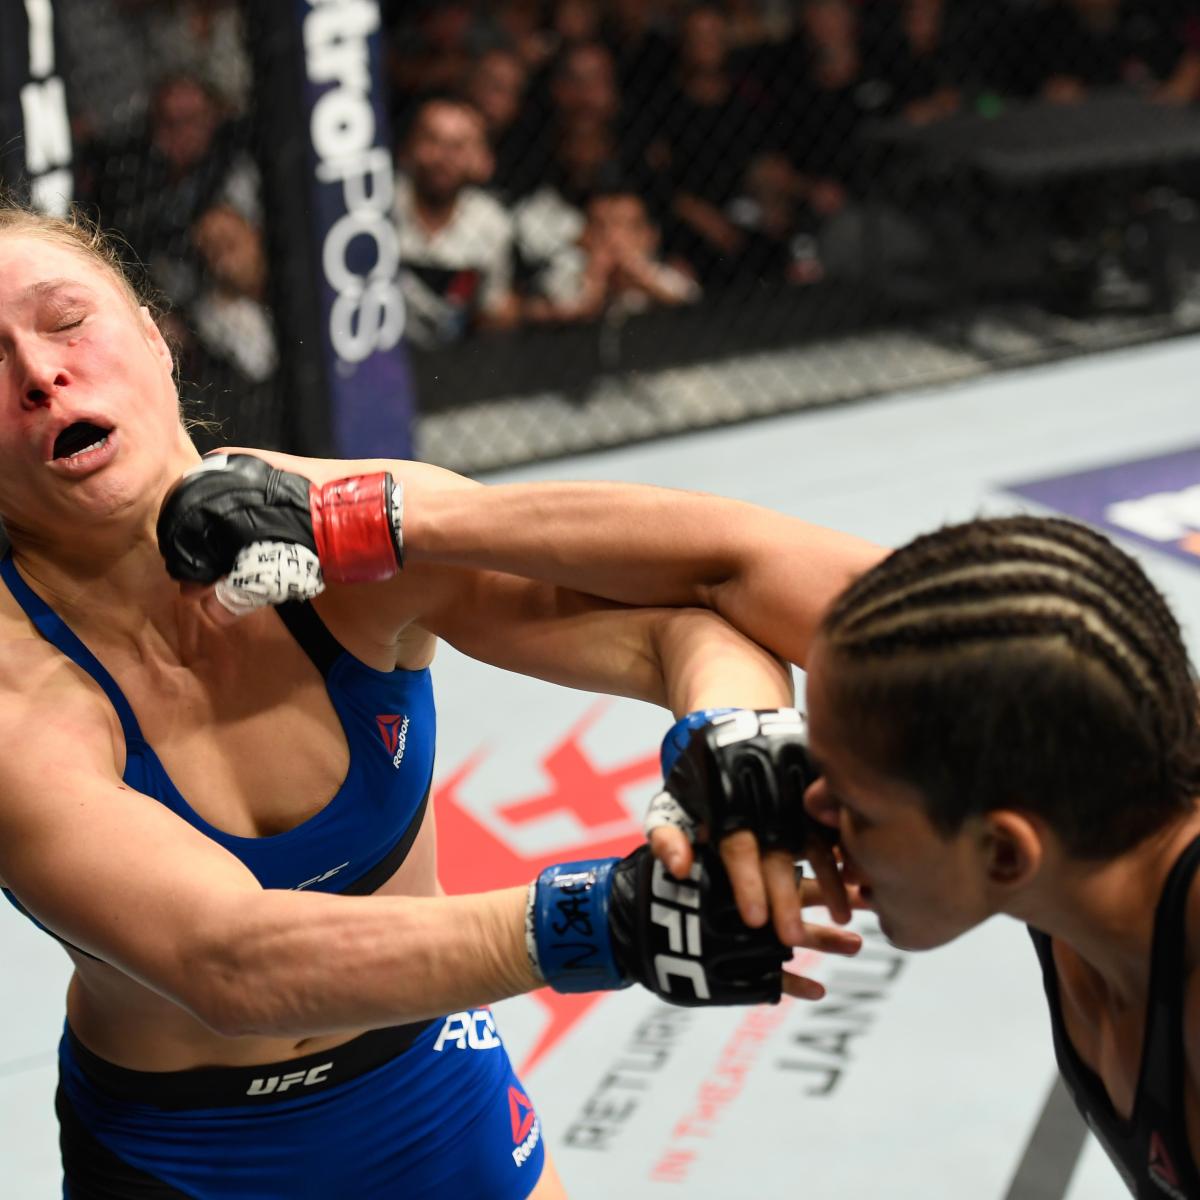 How many times has Ronda Rousey lost a fight?